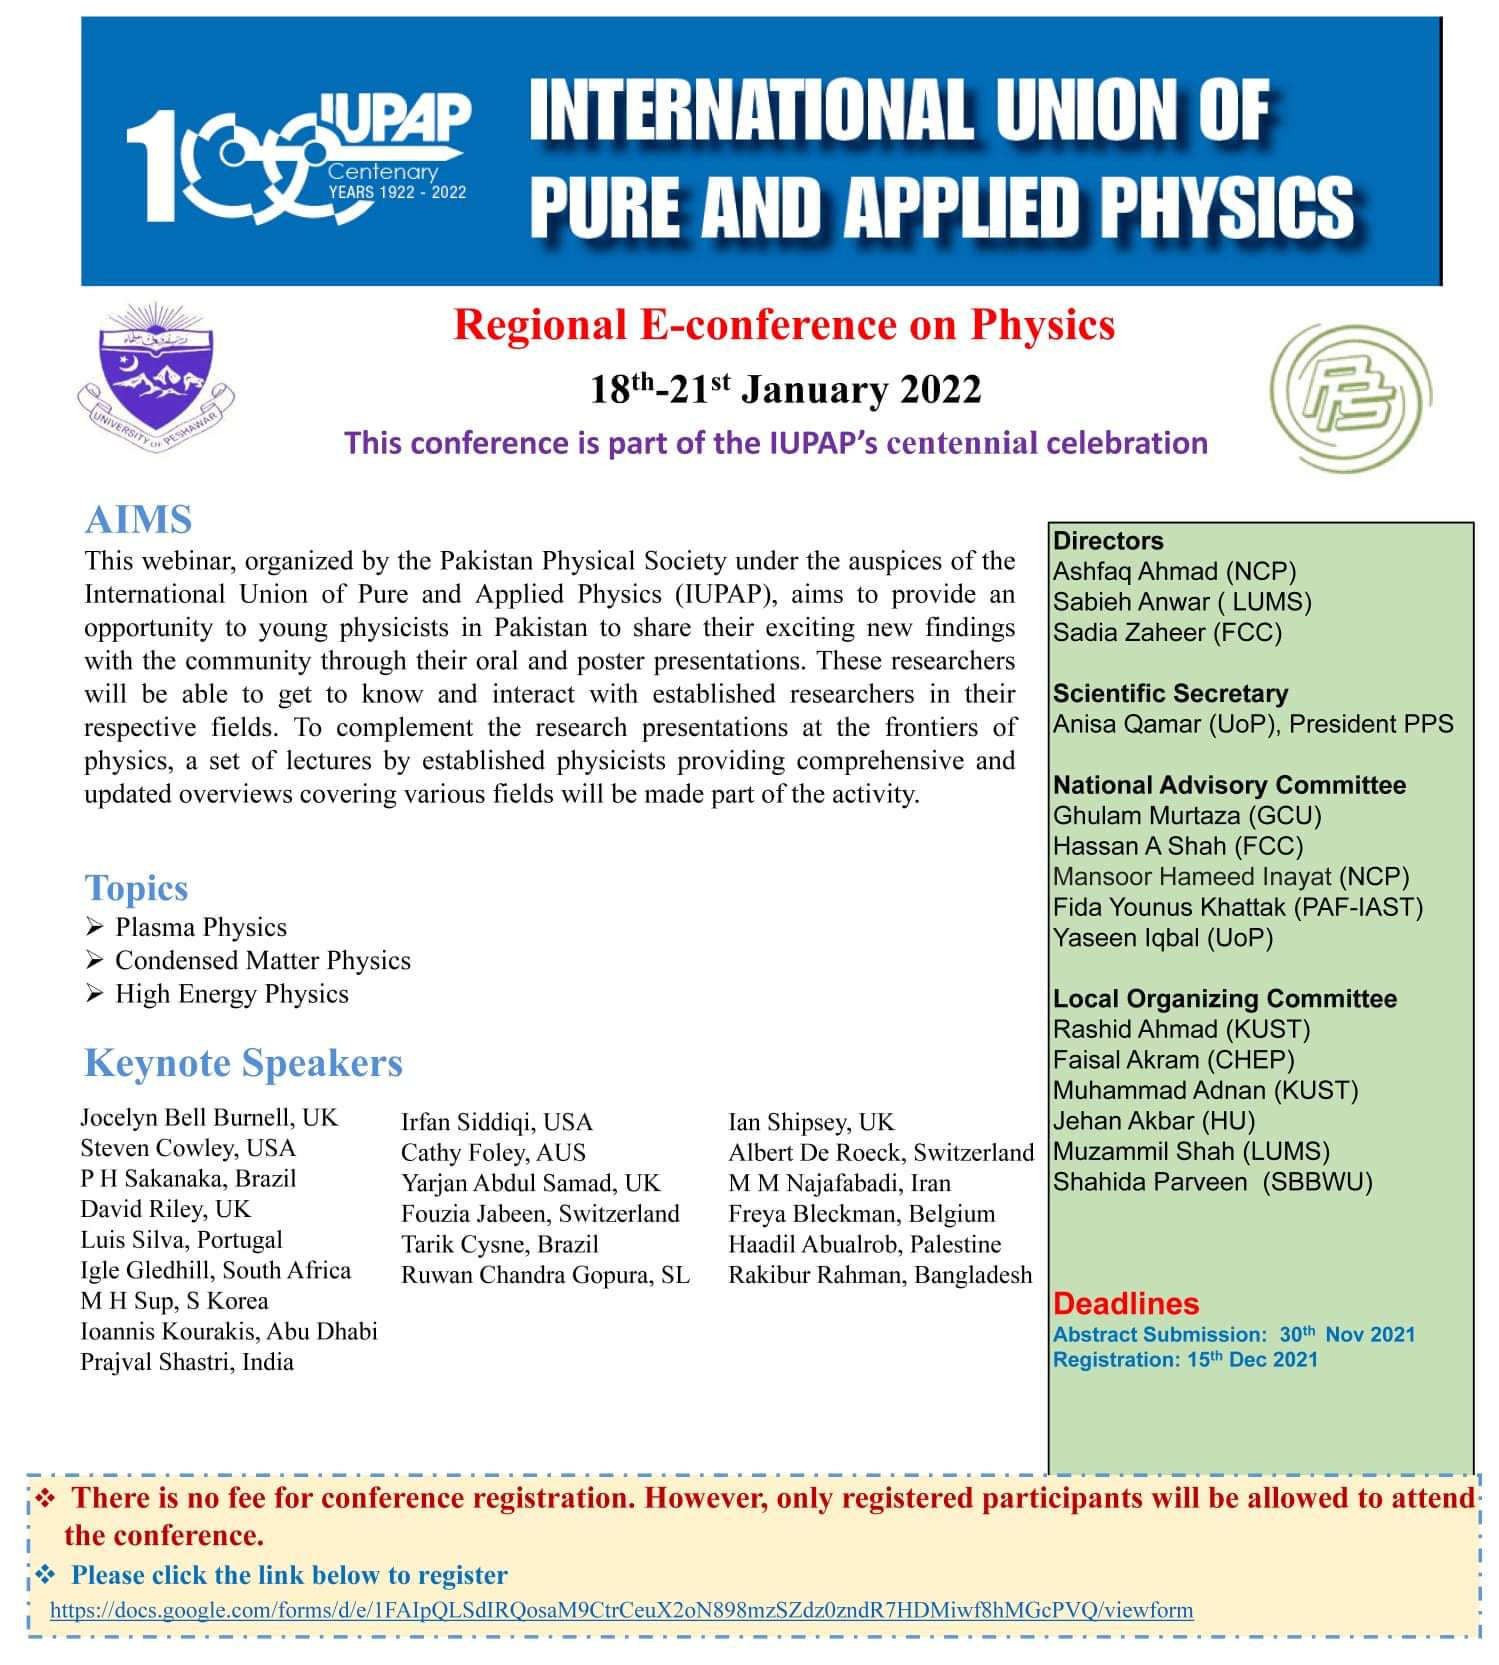 Regional E-conference on Physics